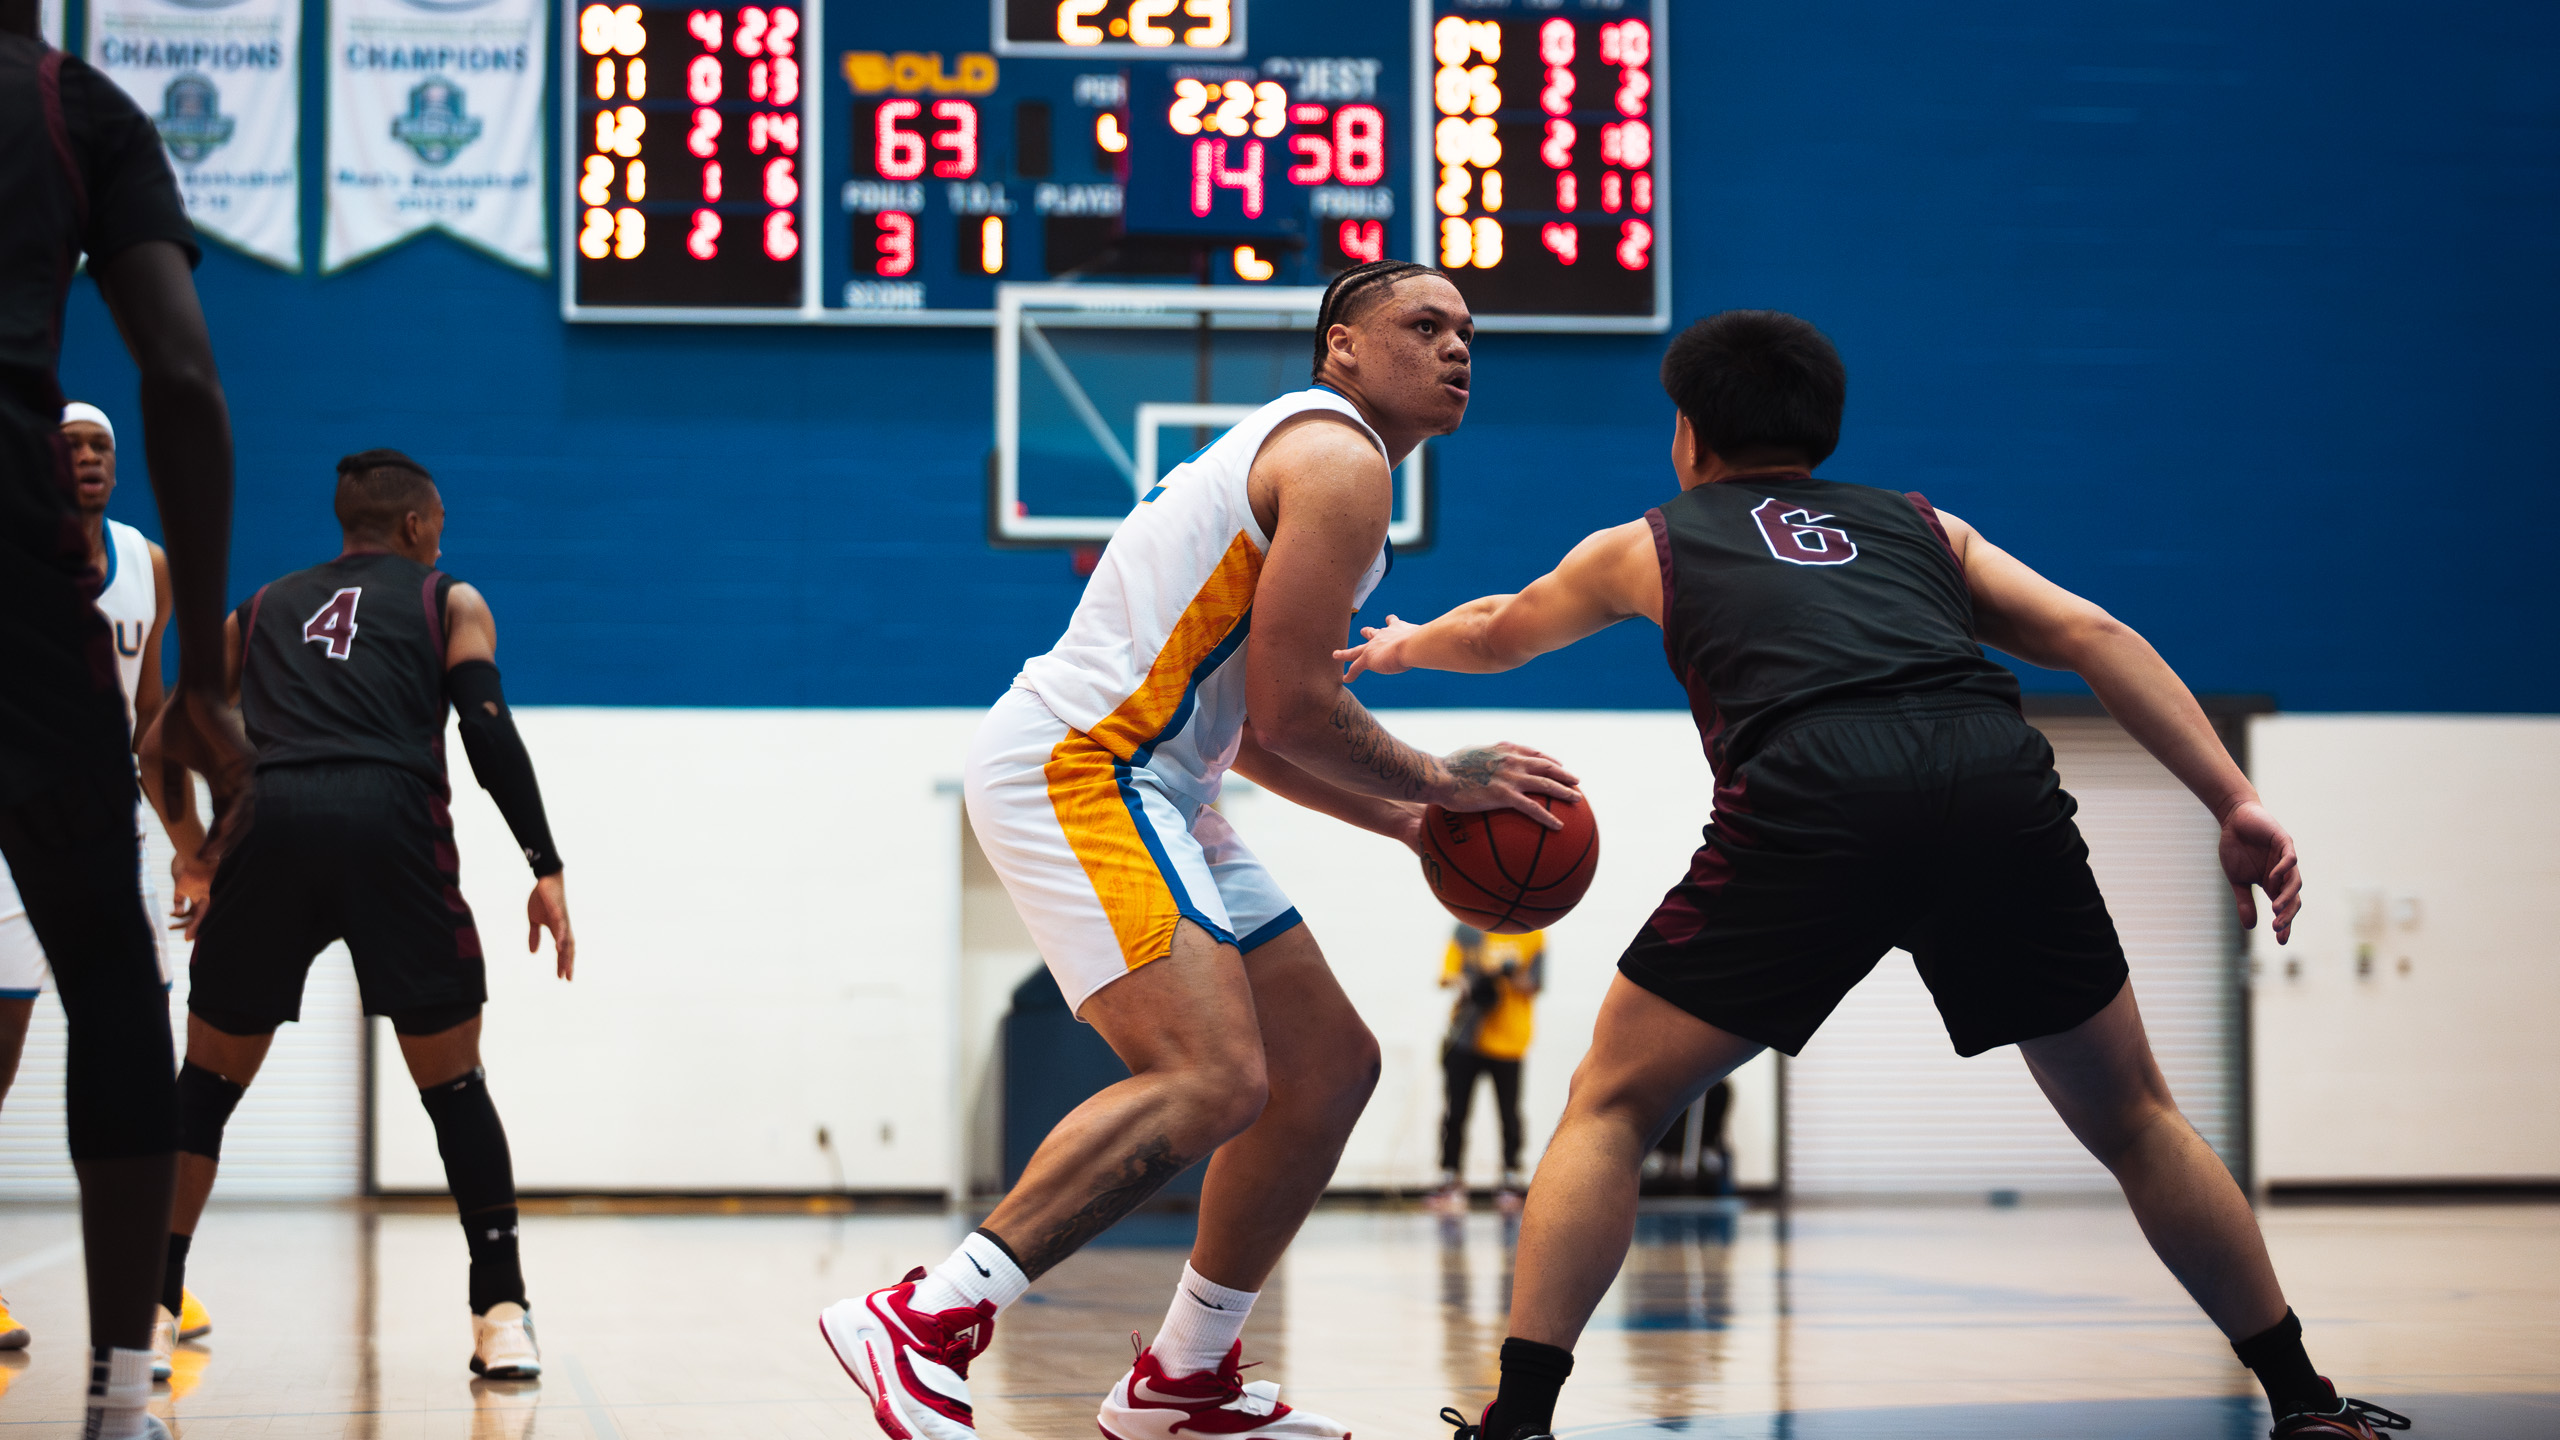 TMU men's basketball player Aaron Rhooms holds the ball above his knee as he is guarded by a McMaster Marauders defender